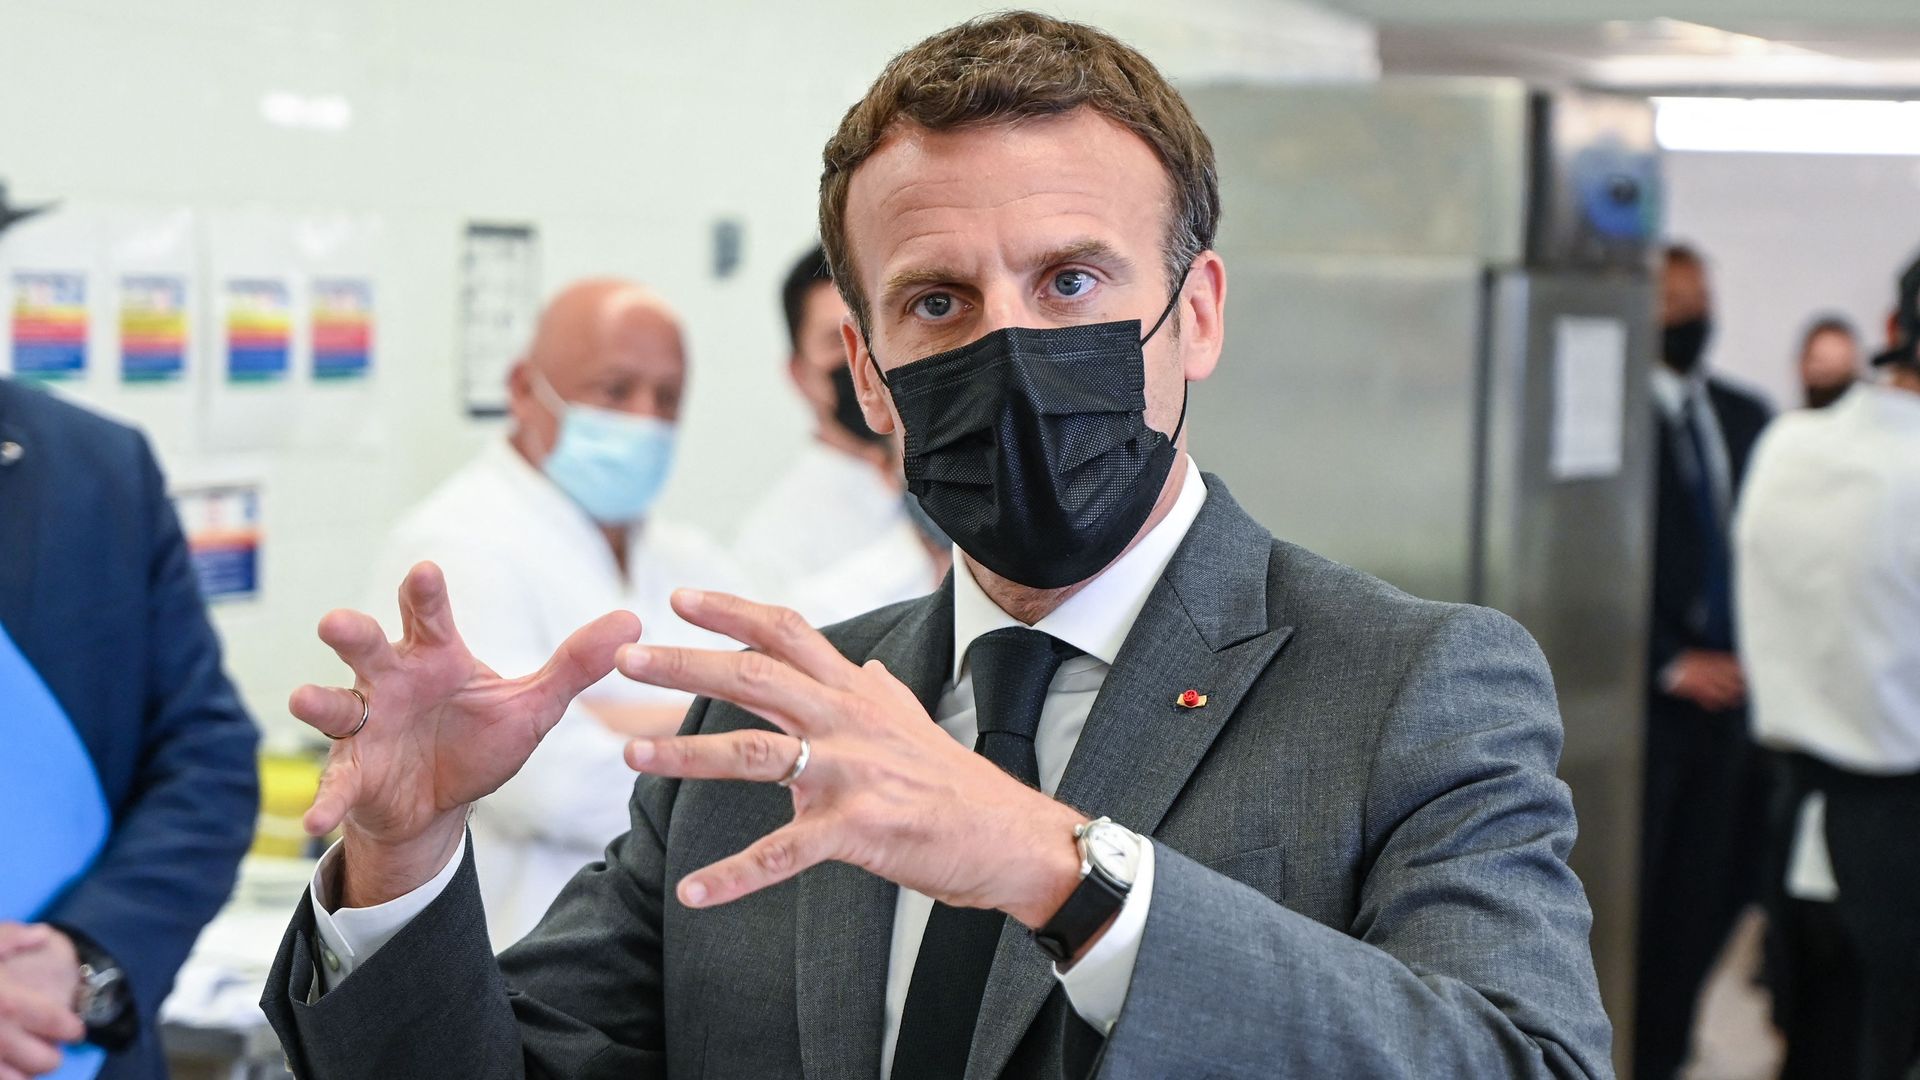 Emmanuel Macron speaks to journalists at the Hospitality school in Tain l'Hermitage on June 8, 2021